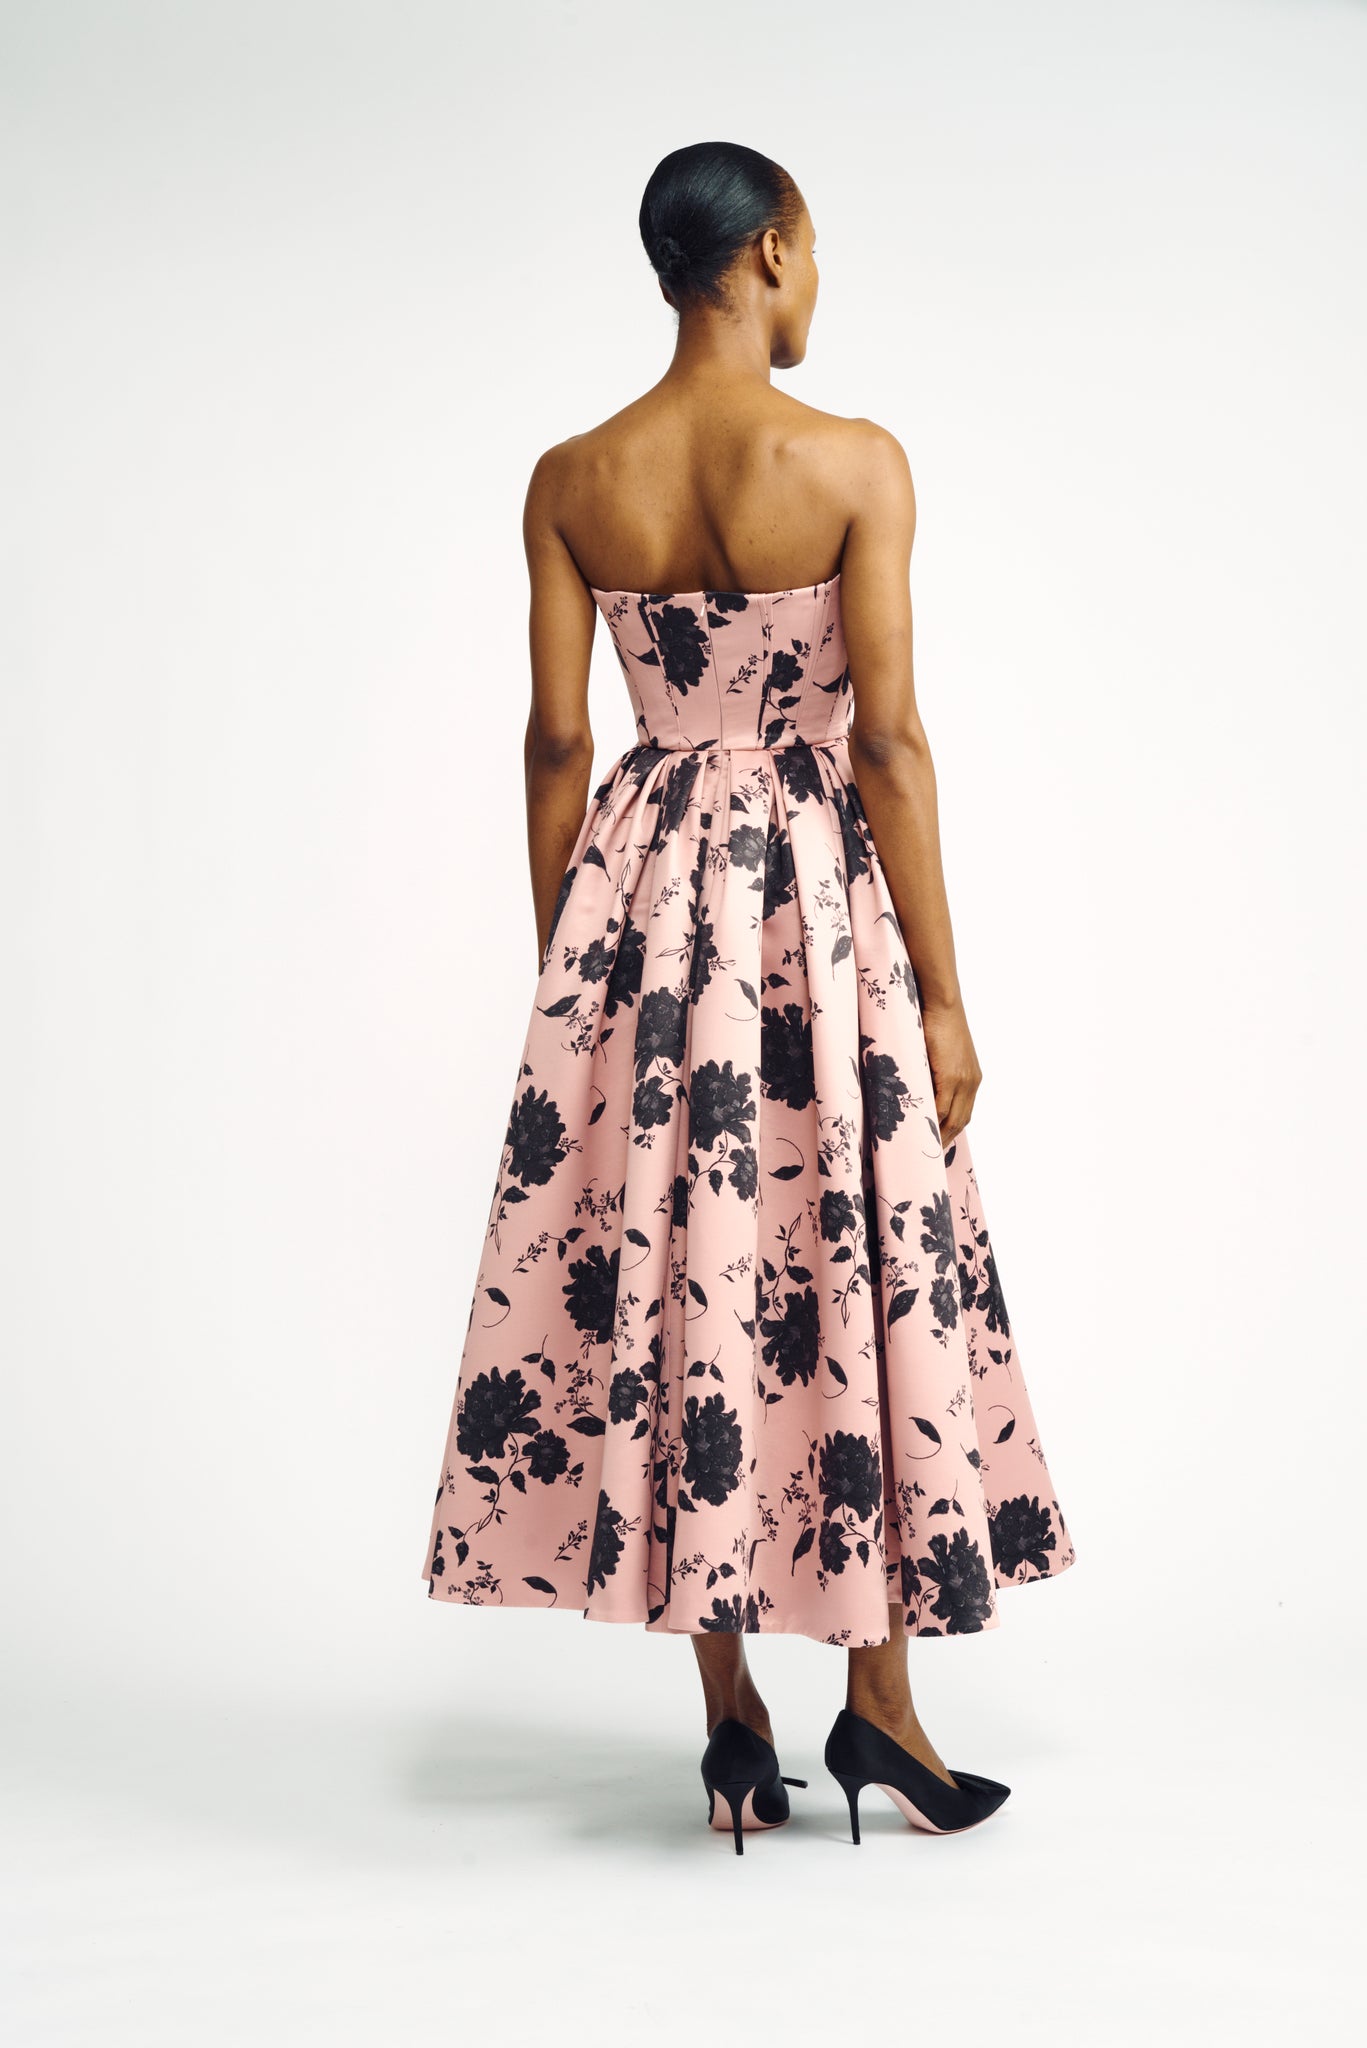 Samuelle Dress | Pink and Black Floral Printed Strapless Fit-and-Flare Dress | Emilia Wickstead